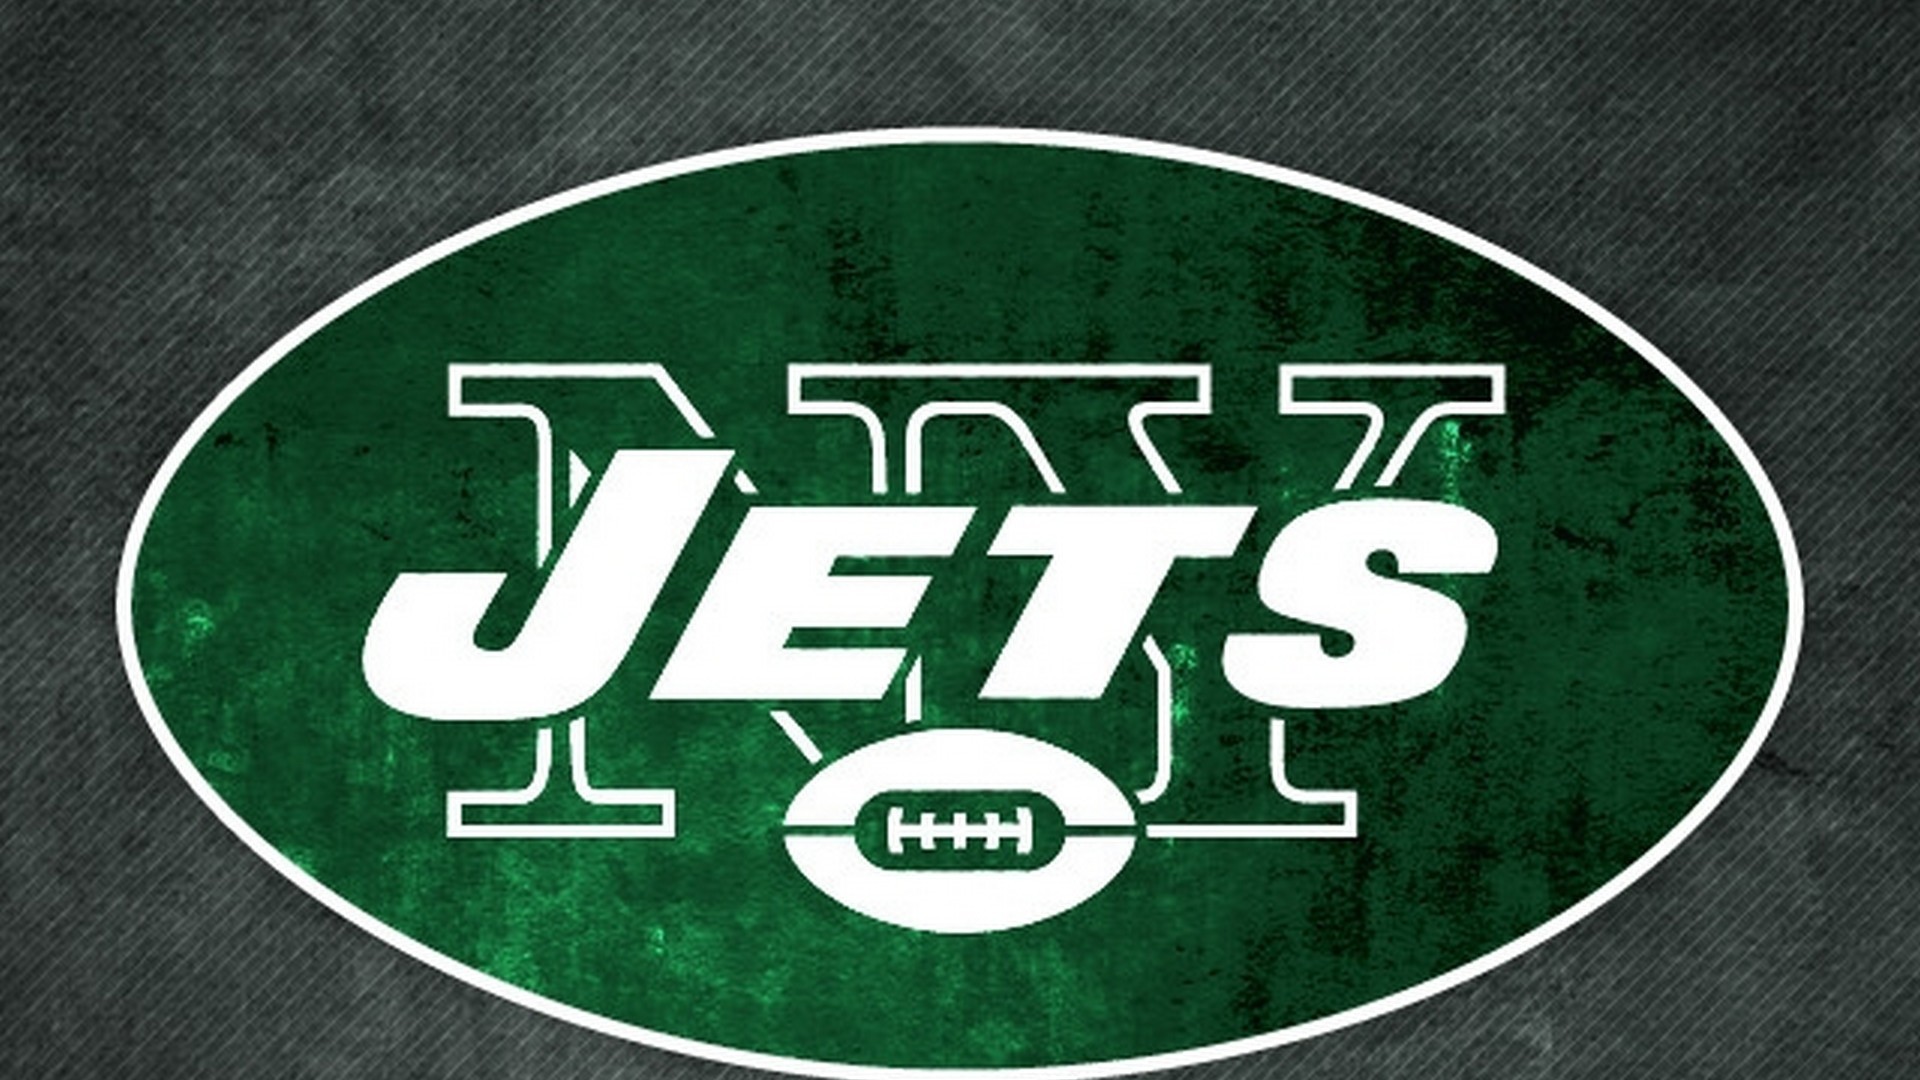 1920x1080 Wallpapers New York Jets with resolution  pixel. You can make this  wallpaper for your